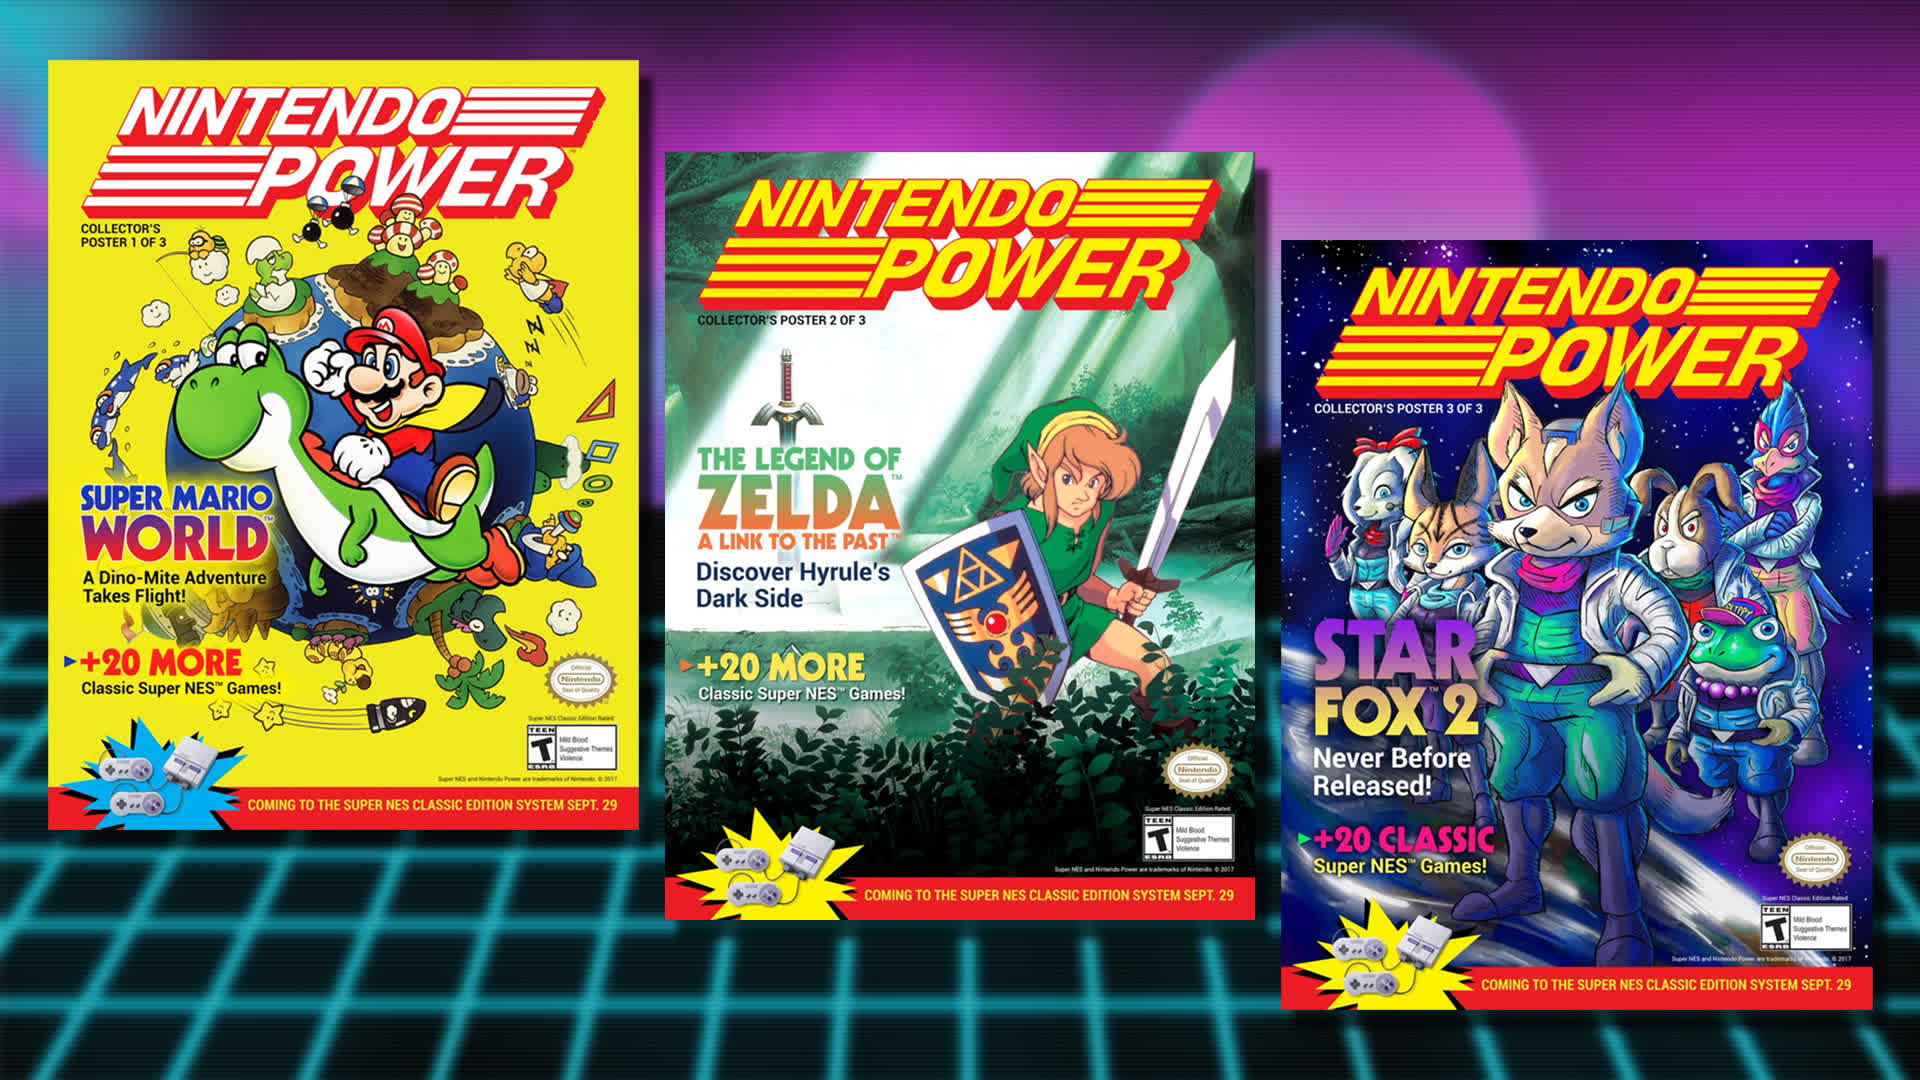 Every issue of Nintendo Power is now available to download in one convenient bundle